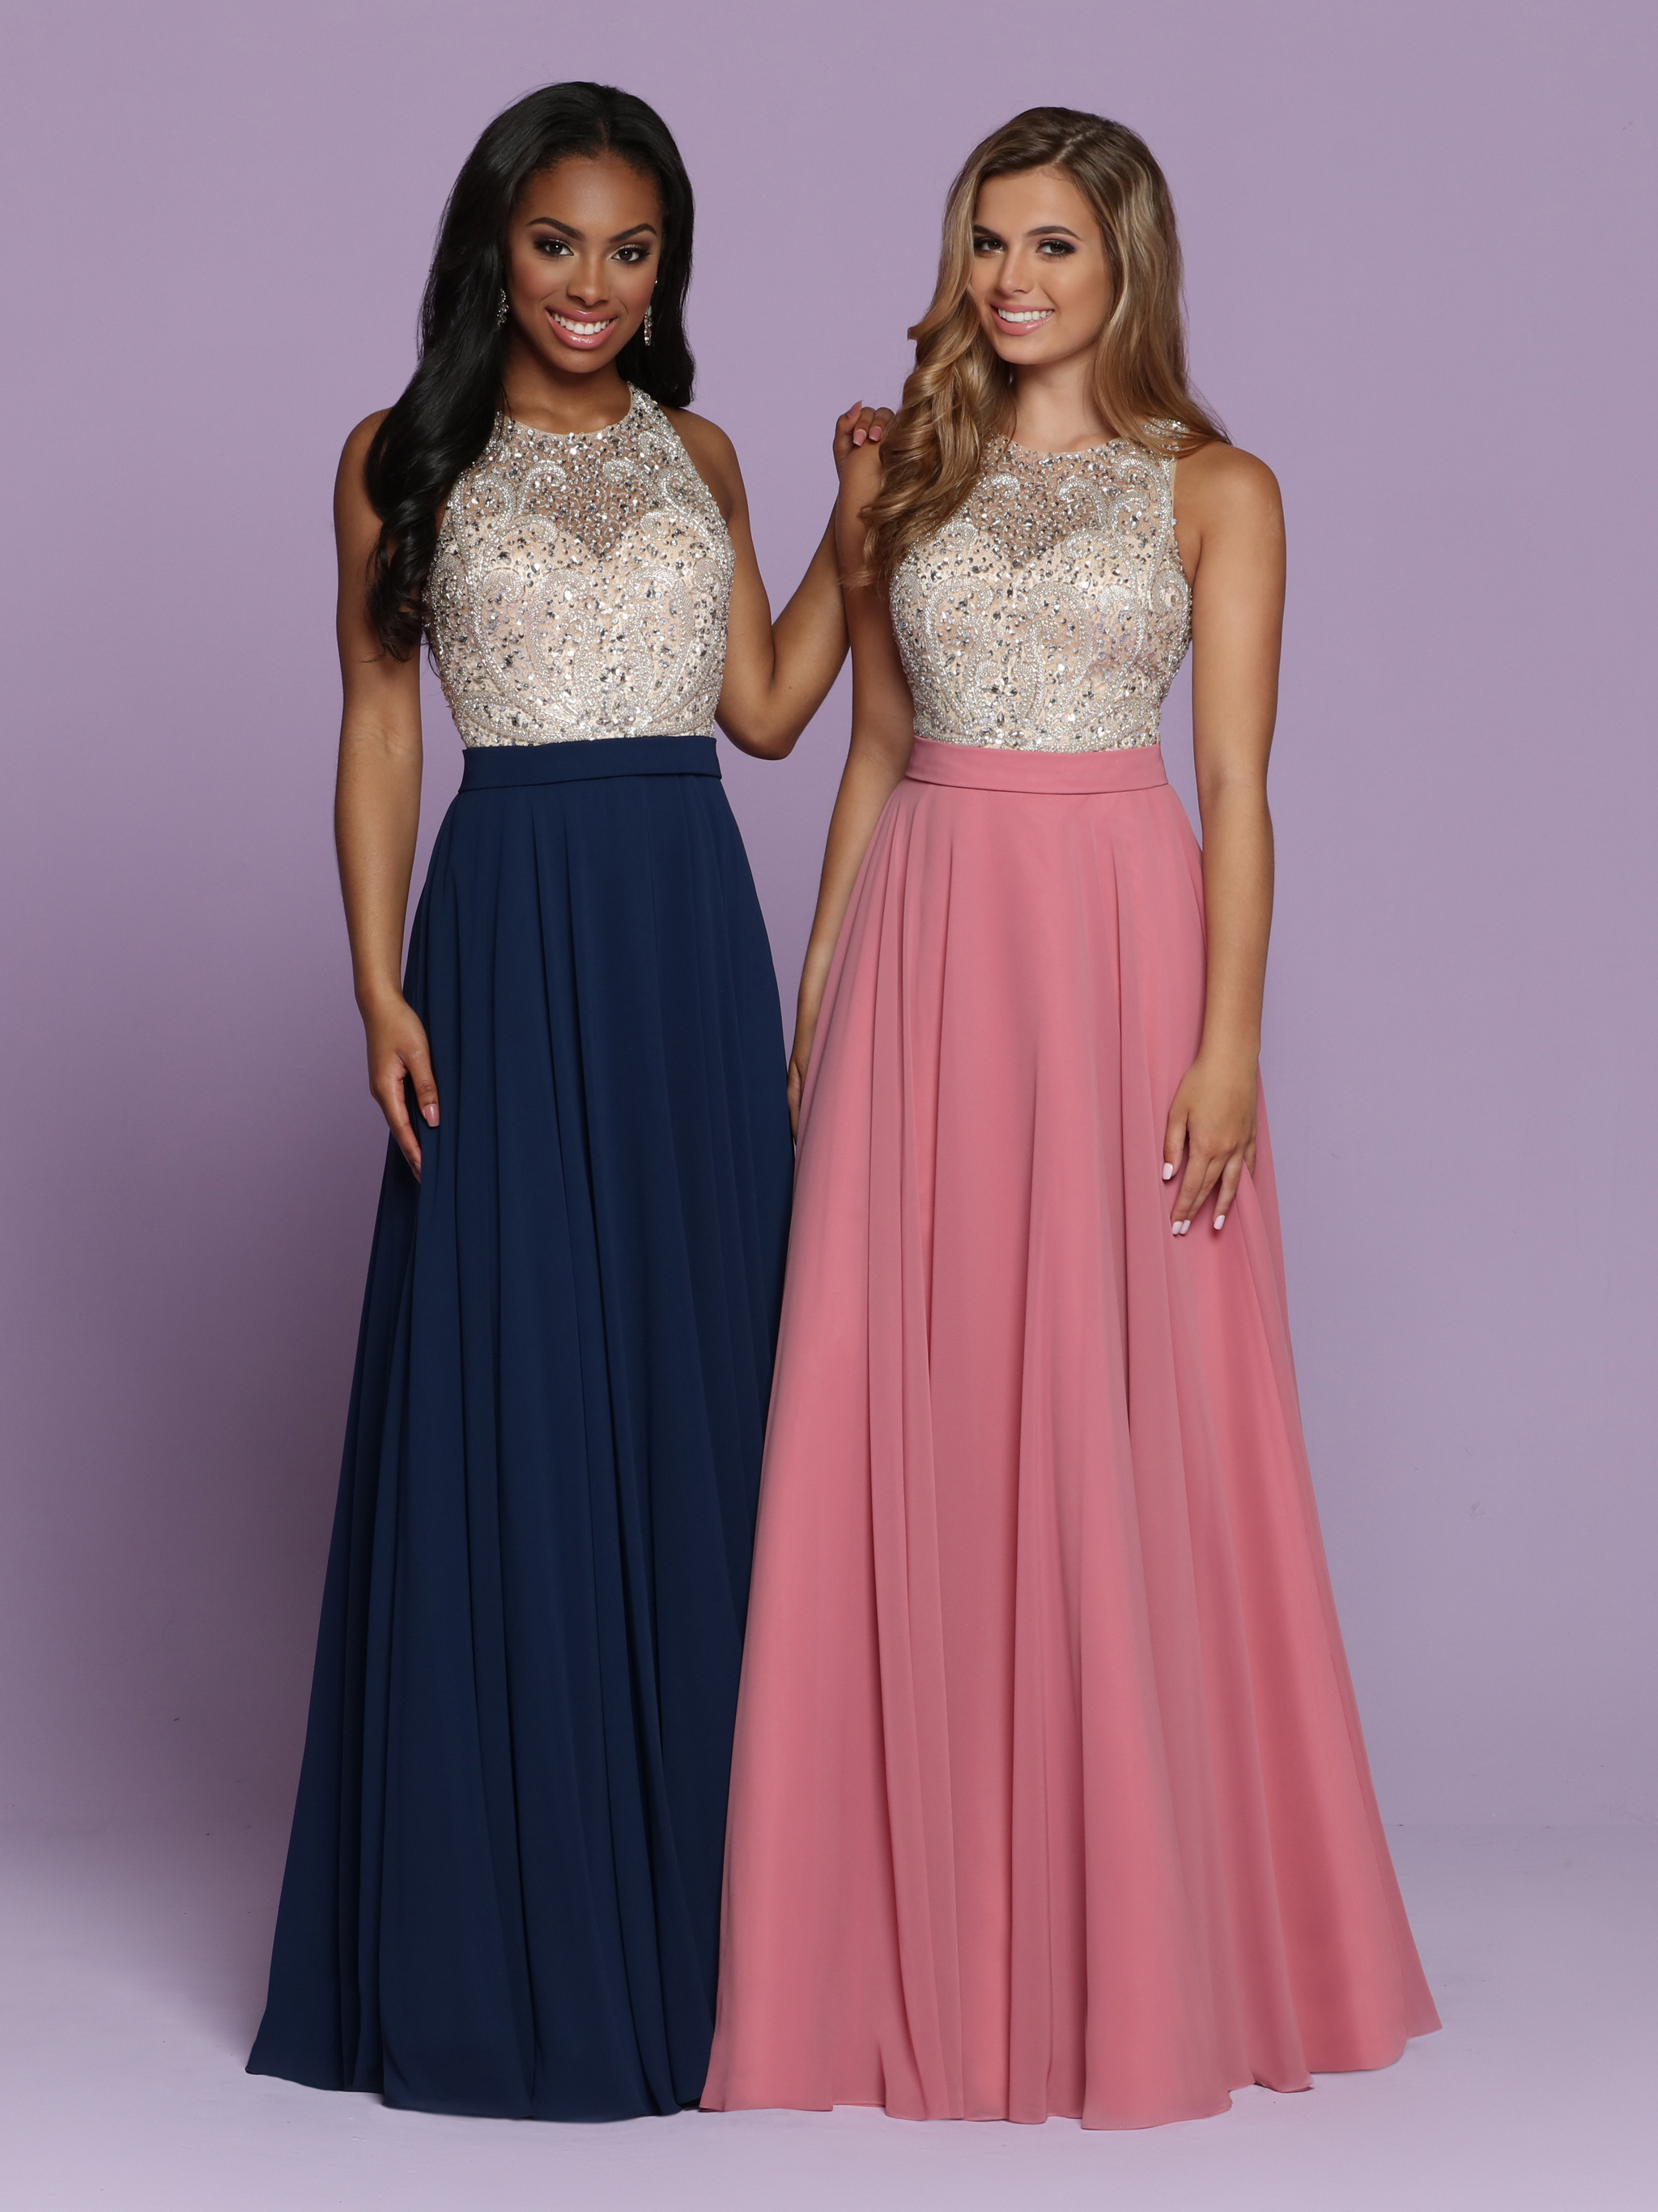 Prom Dresses & Formal Gowns | Sparkle Collection